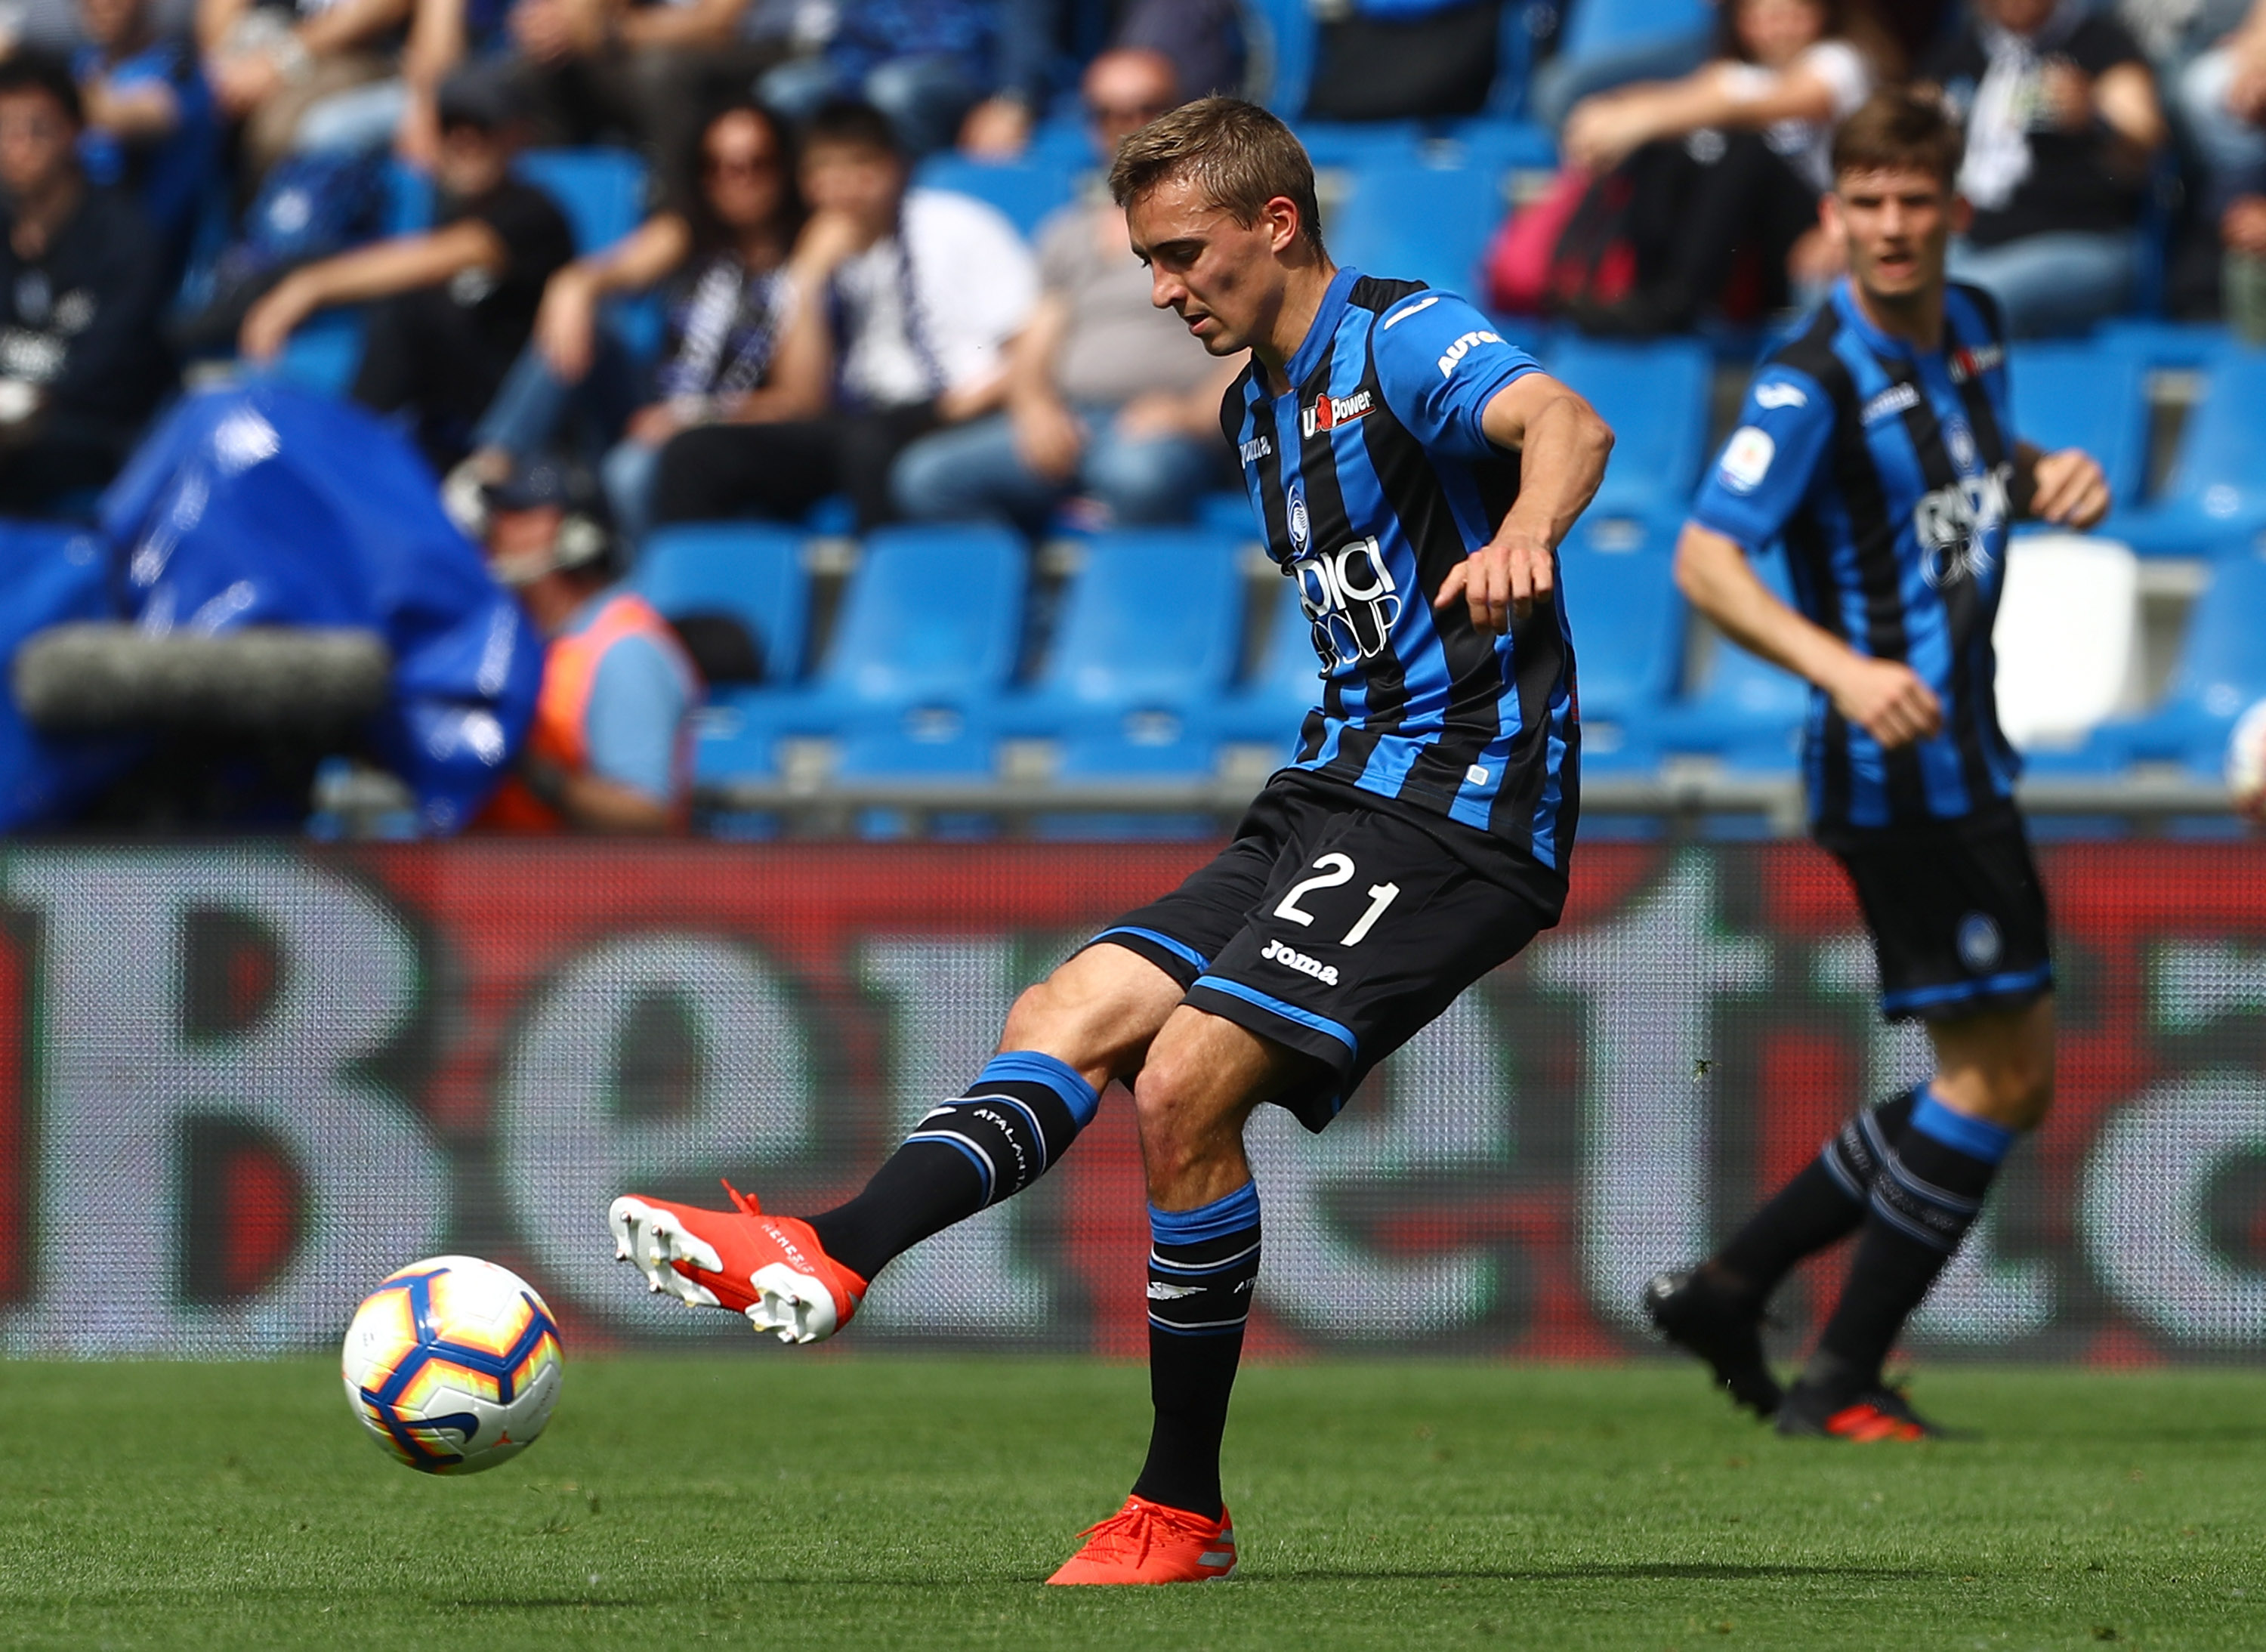 REGGIO NELL'EMILIA, ITALY - MAY 11:  Timothy Castagne of Genoa CFC in action during the Serie A match between Atalanta BC and Genoa CFC at Mapei Stadium - Citta del Tricolore on May 11, 2019 in Bergamo,  (Photo by Marco Luzzani/Getty Images)